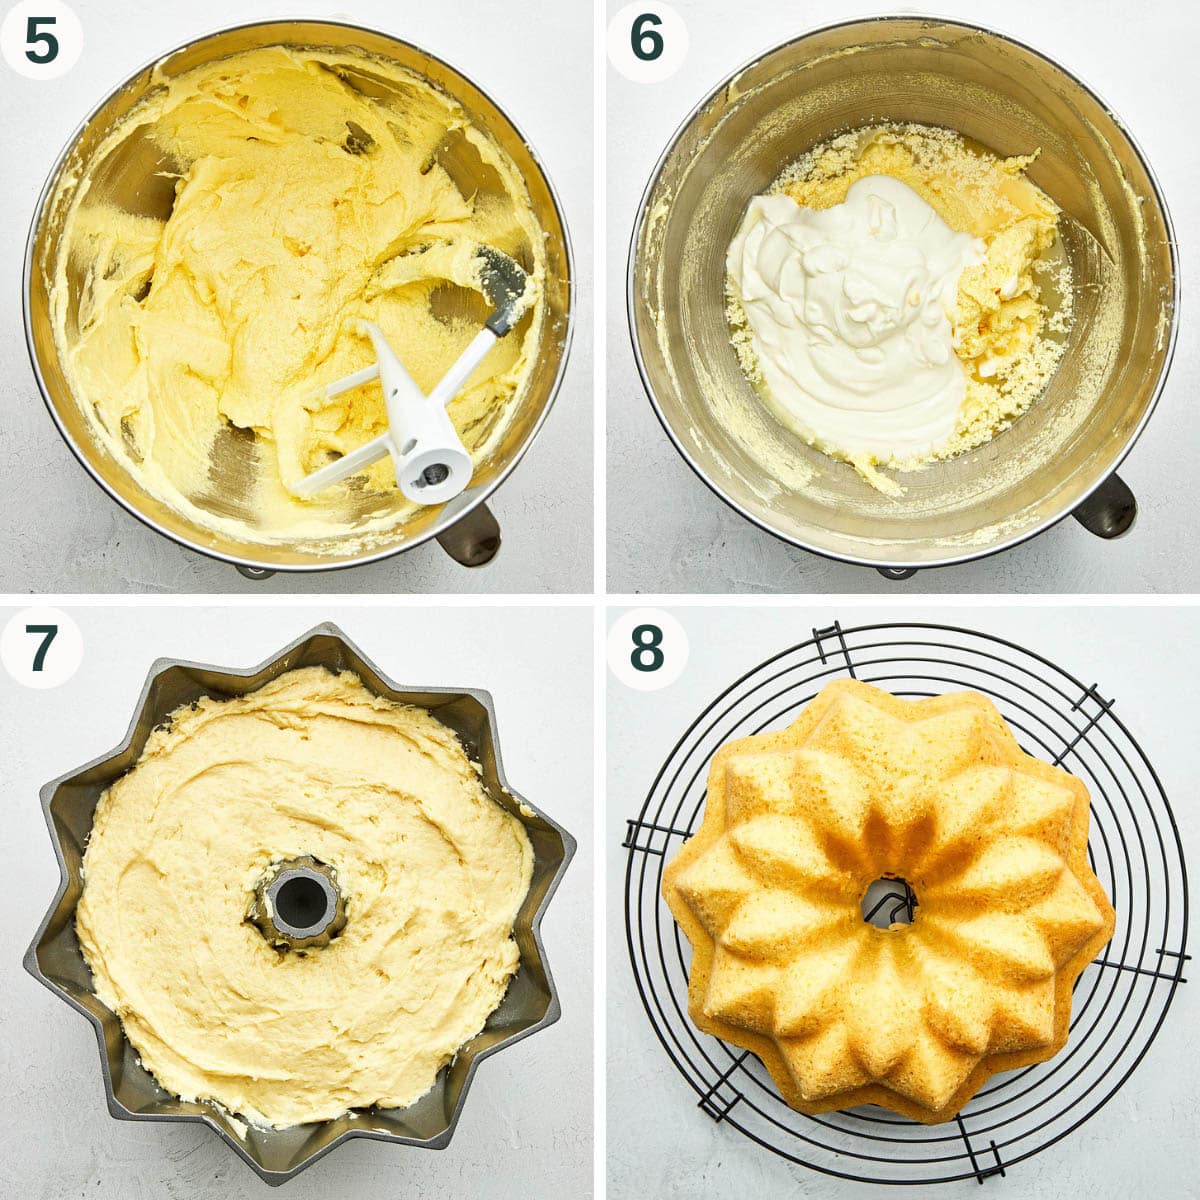 Bundt steps 5 to 8, mixed batter and before and after baking.